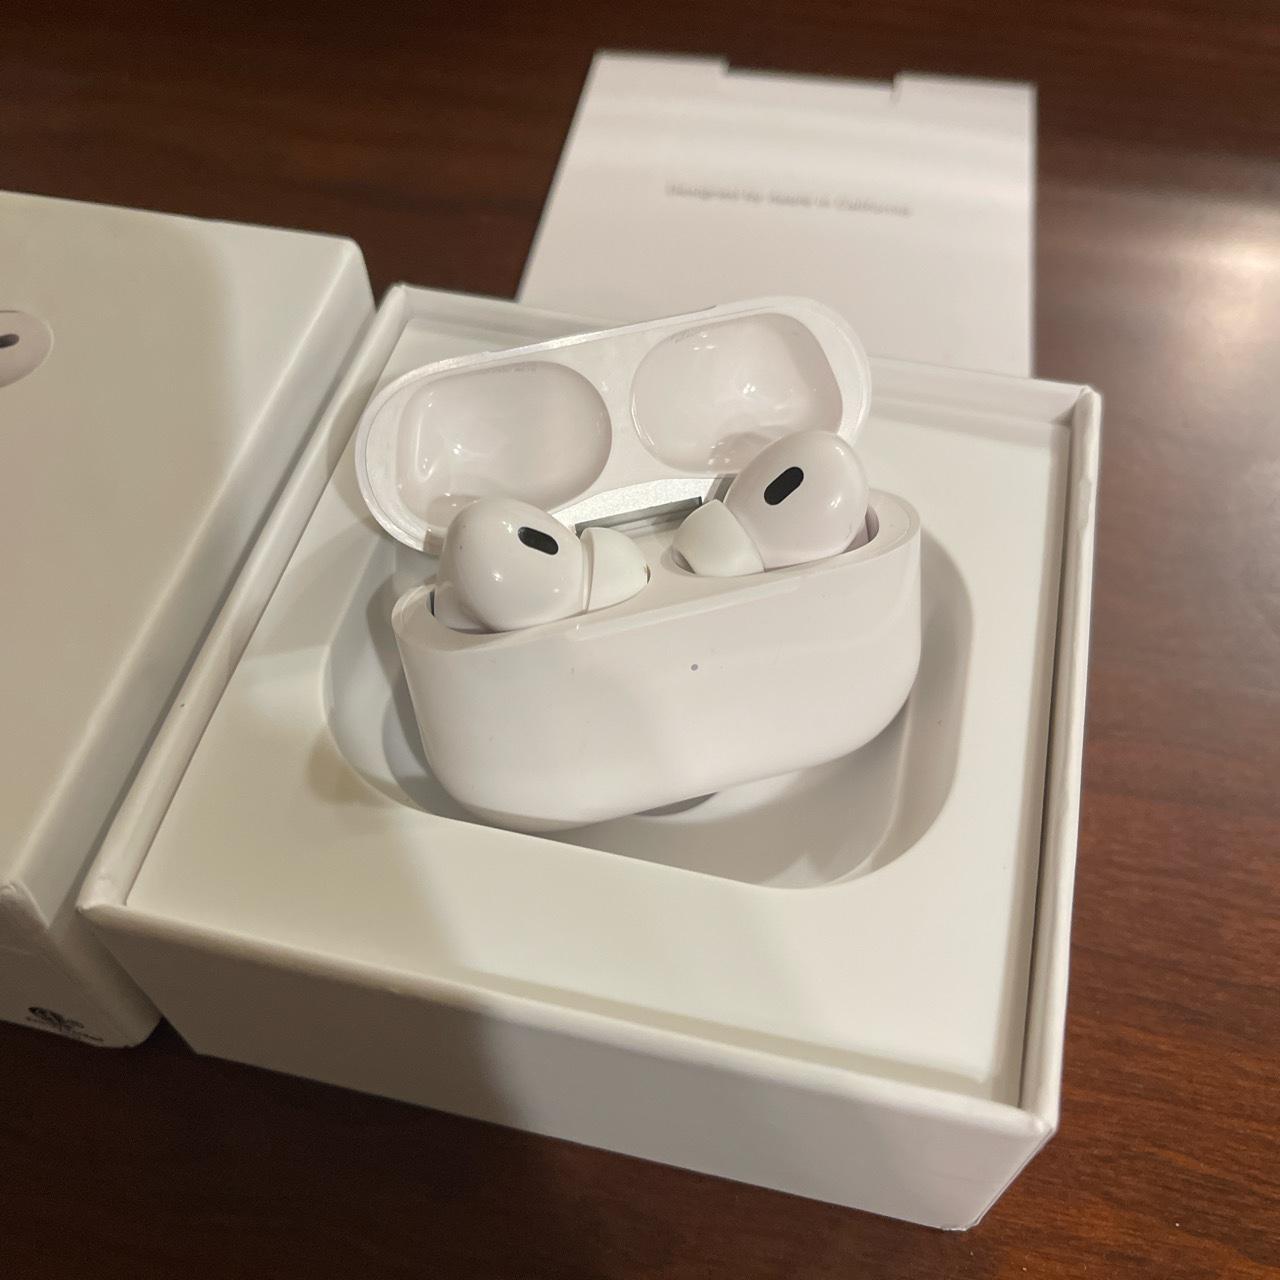 airpod pros new in sealed box. free shipping! Will... - Depop